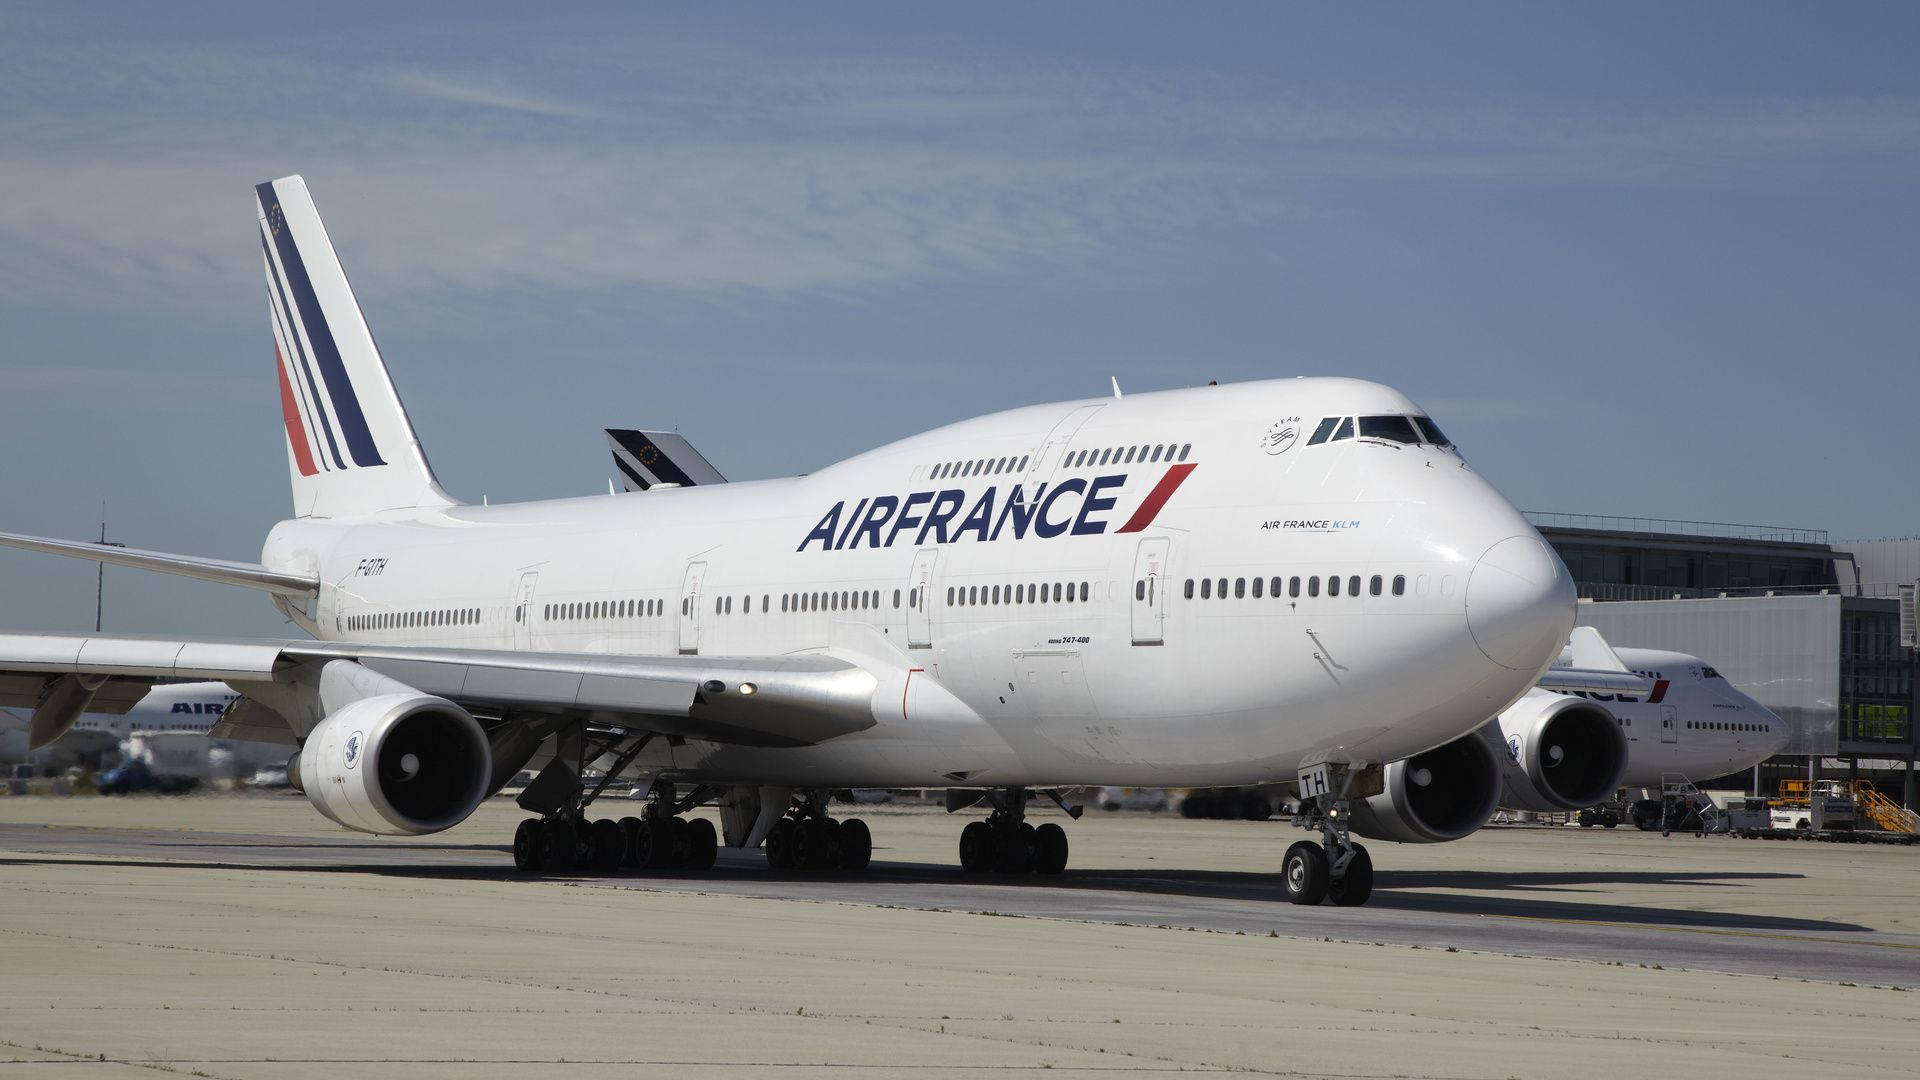 Jumboair France Boeing B747 Would Be Translated As 